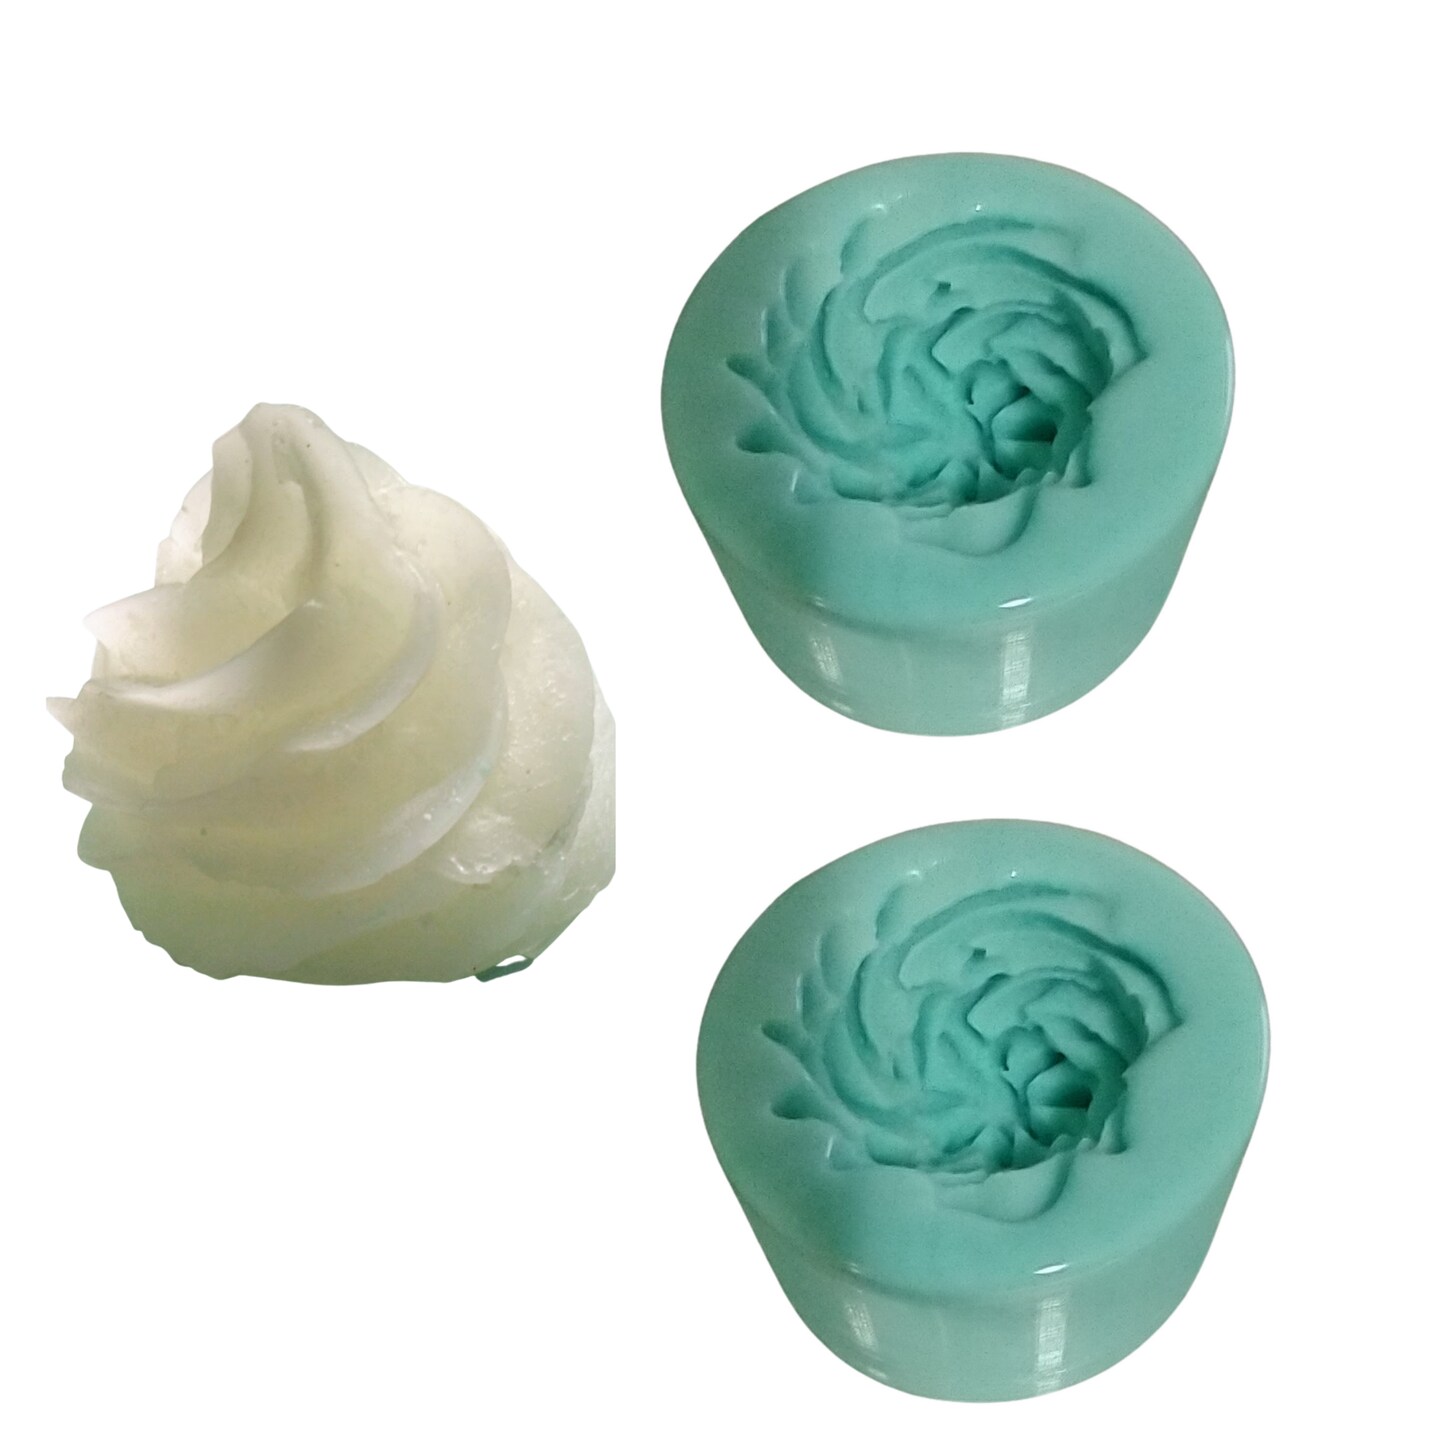 2pc Realistic Whipped Cream Dollop Silicone Mold| Food Shape Soap Mold | Whip Cream Dollop Shape Wax Candle Mold